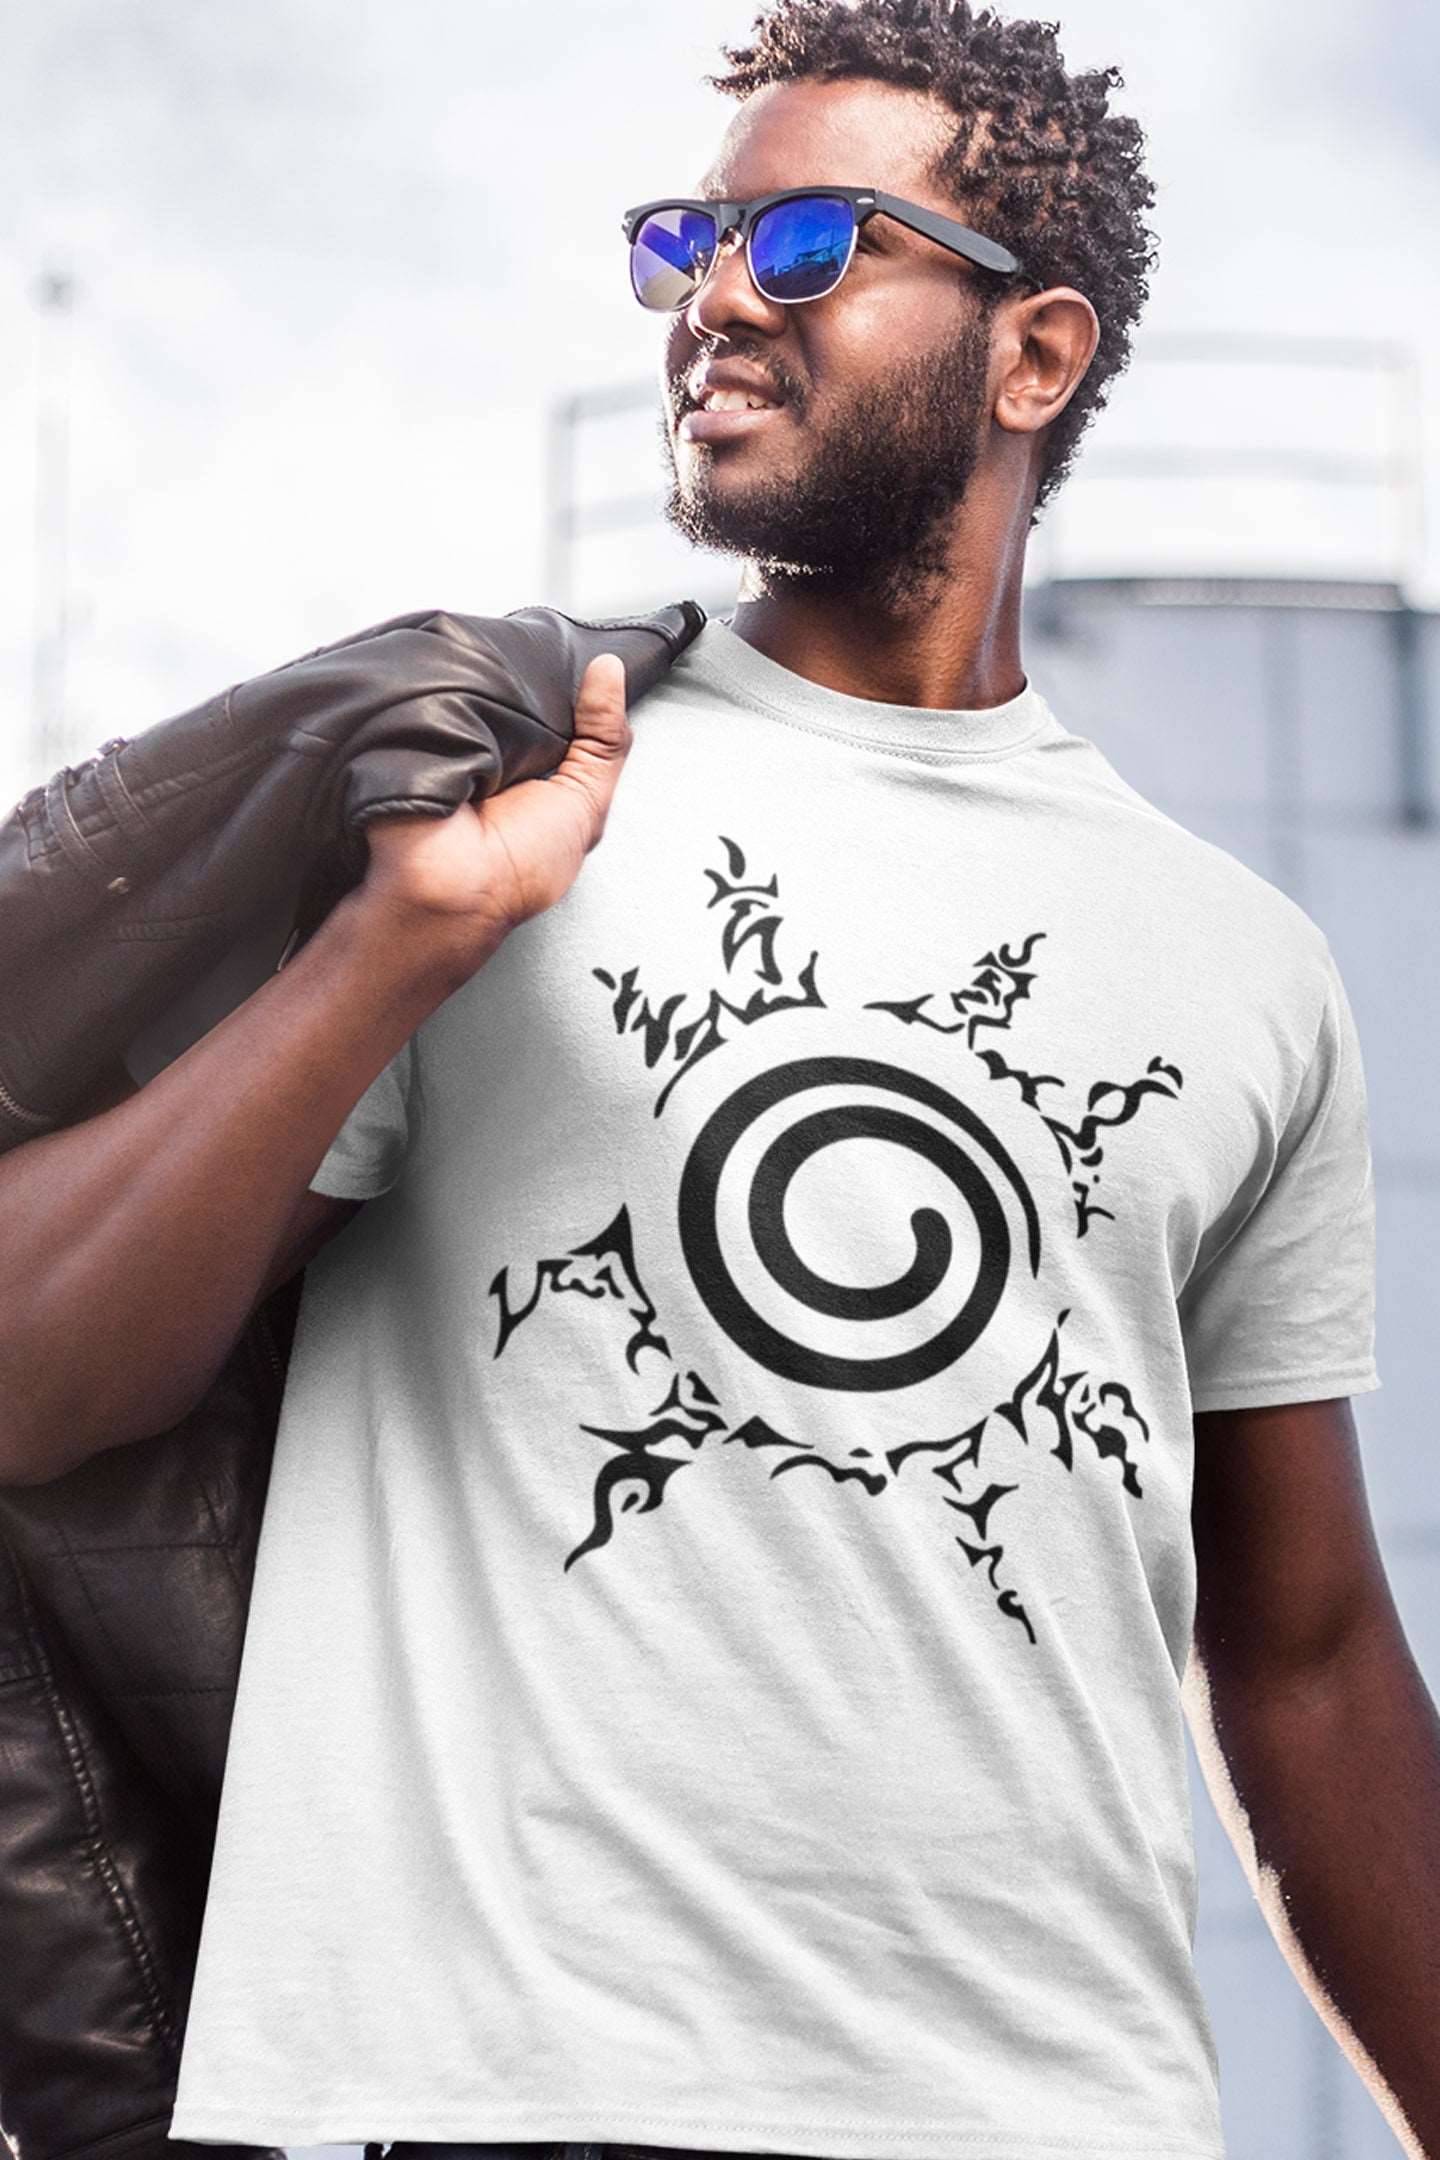 Buy Naruto Seal Style T-Shirt Online